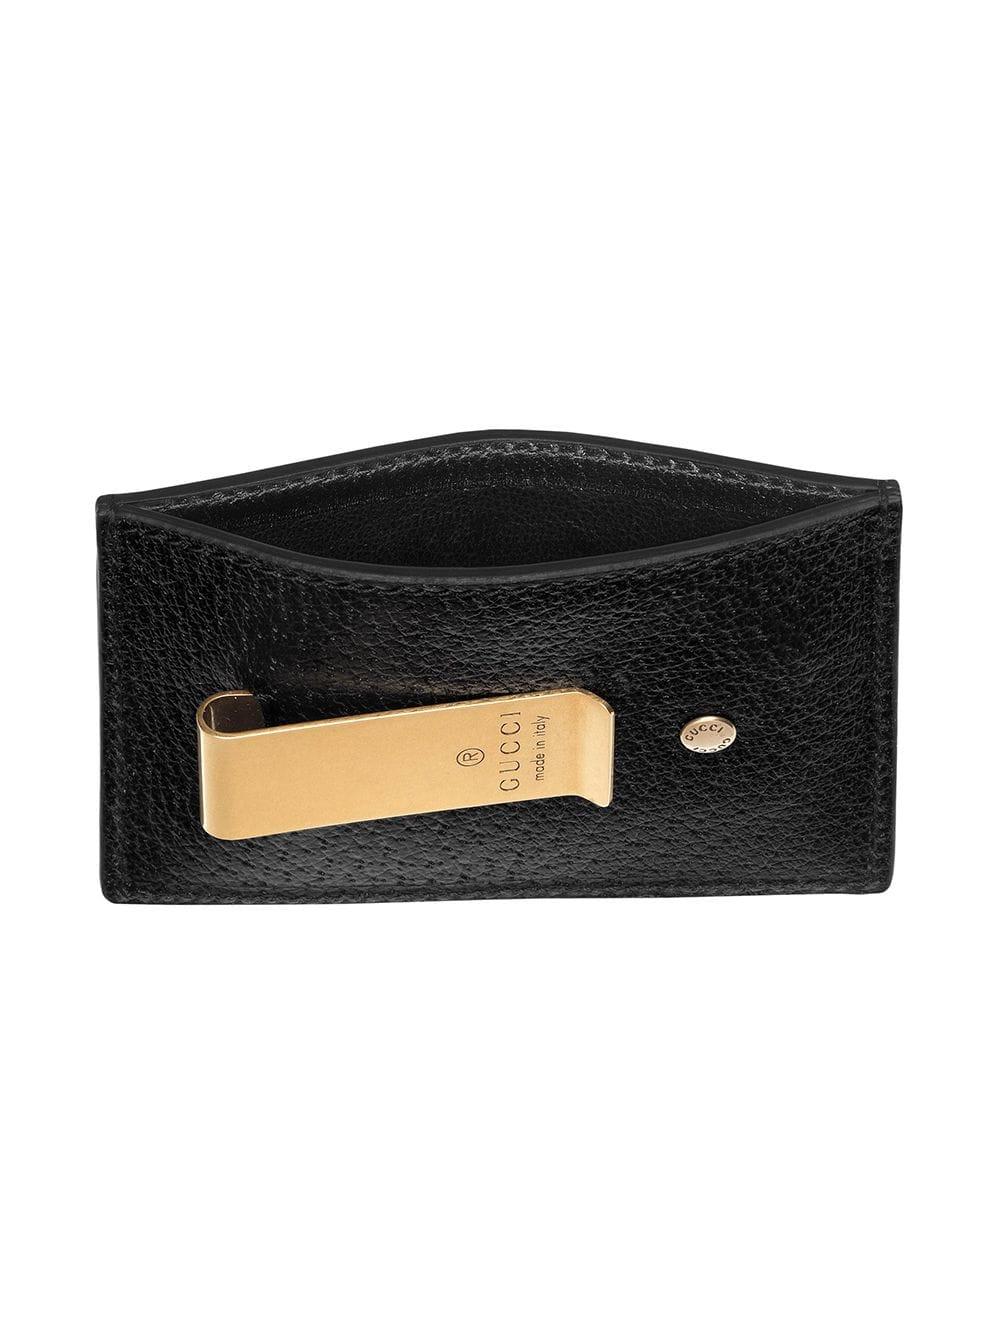 GG Marmont leather money clip, Gucci